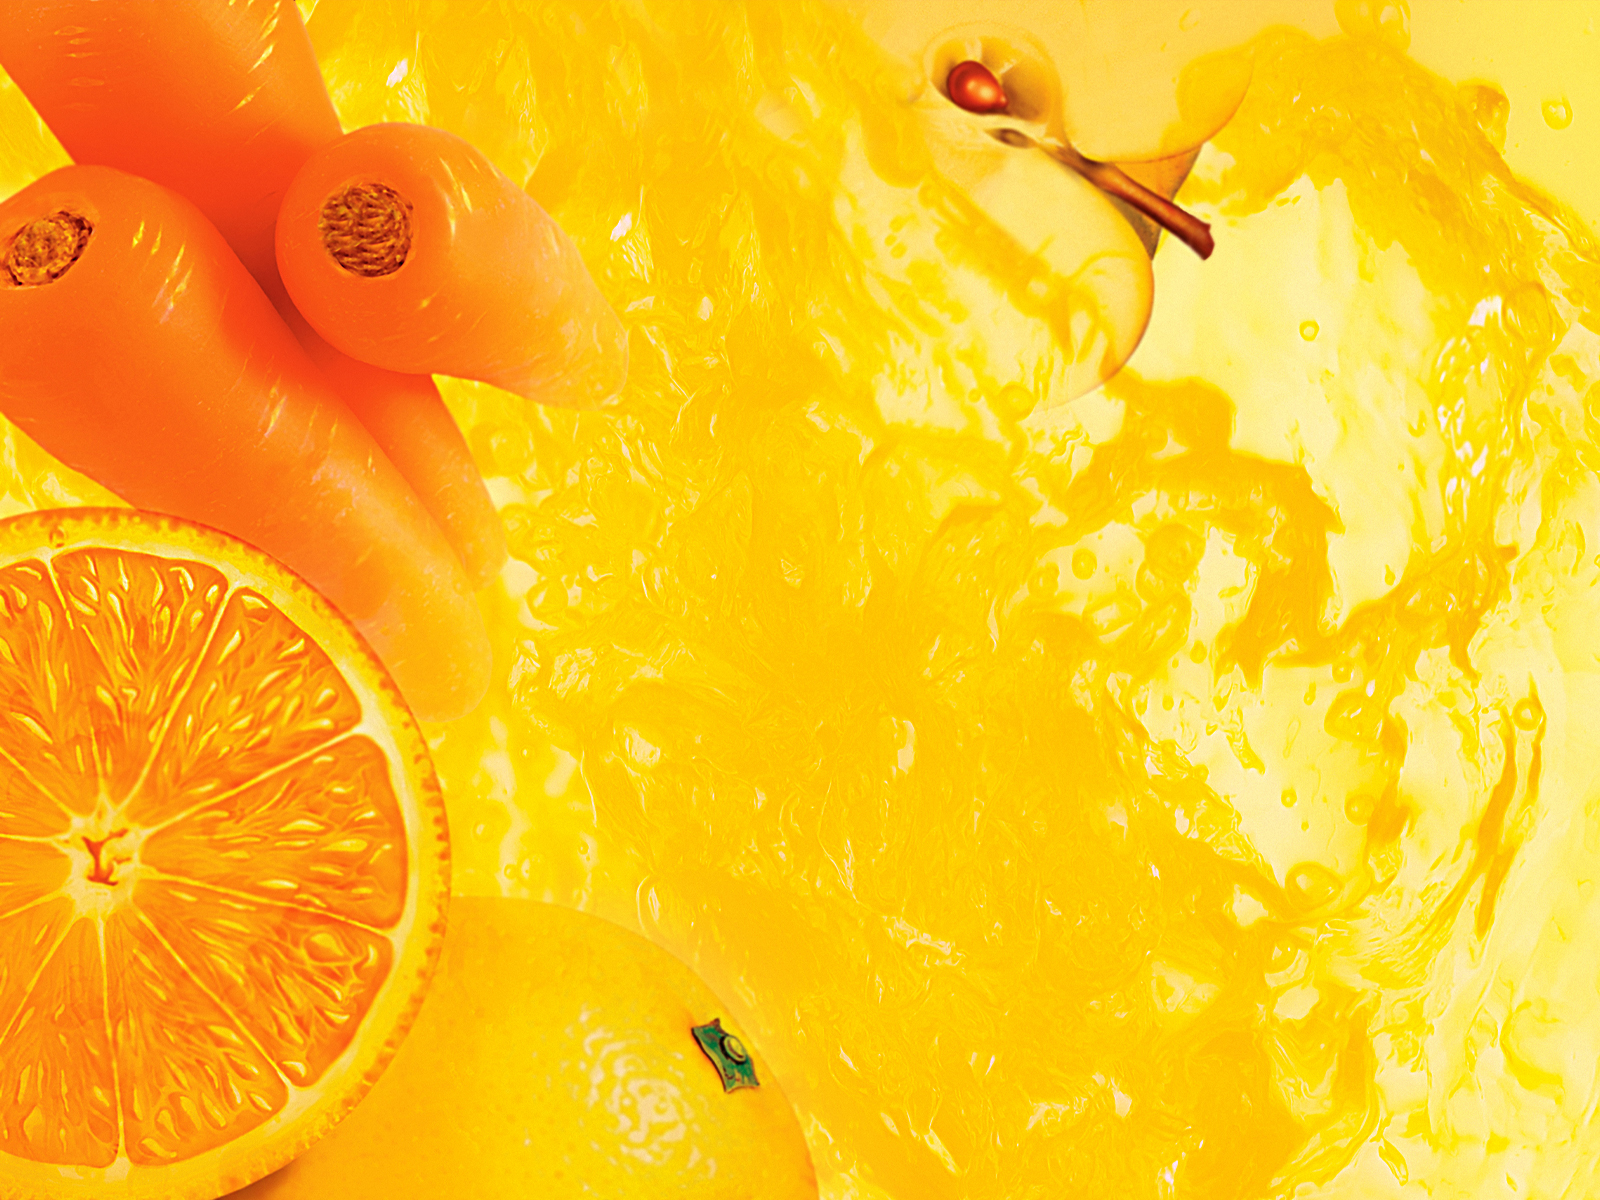 Orange Juice Powerpoint Templates - Food & Drink, Orange - Free PPT  Backgrounds and Templates